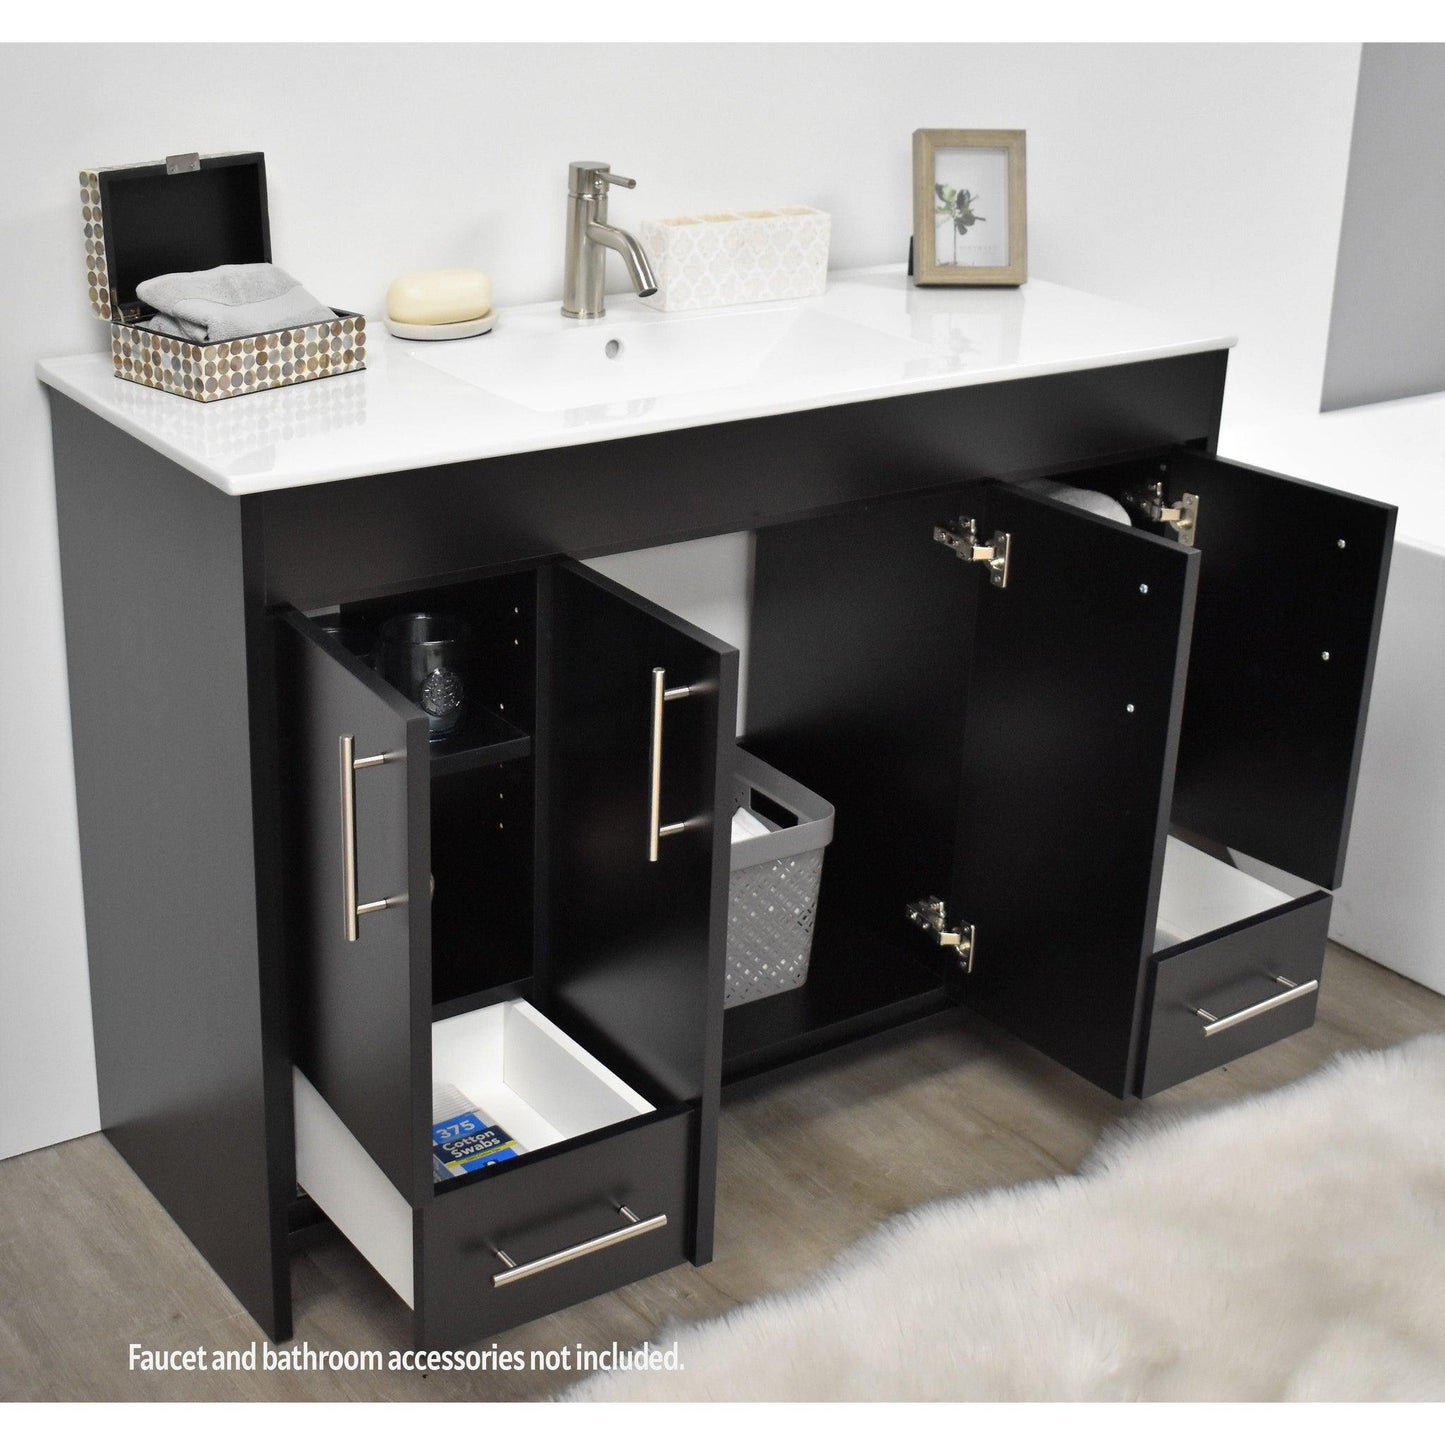 Volpa USA Pacific 48" Black Freestanding Modern Bathroom Vanity With Integrated Ceramic Top and Brushed Nickel Round Handles